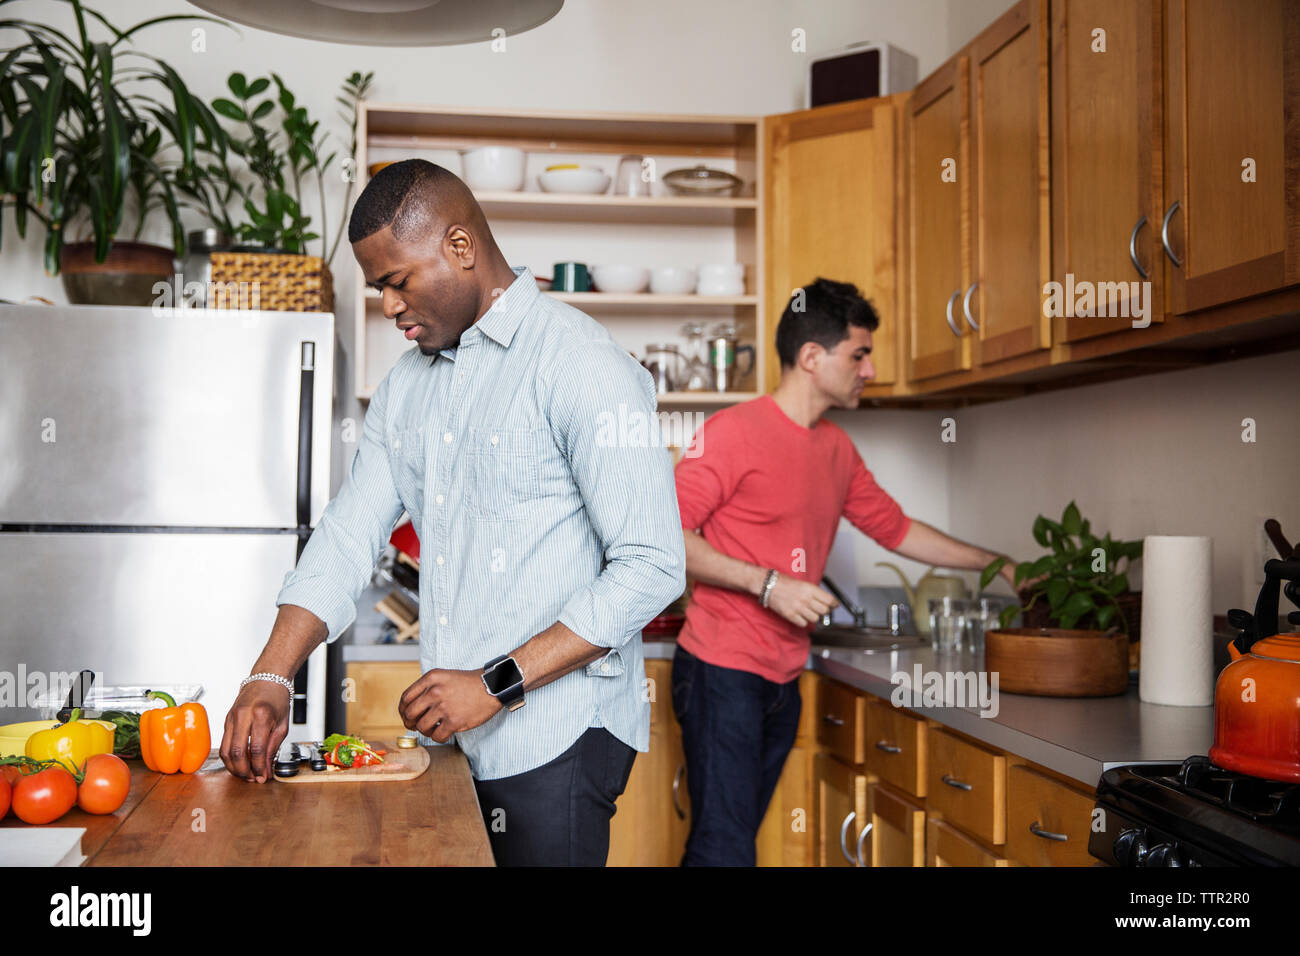 Homosexual males preparing food in kitchen Stock Photo